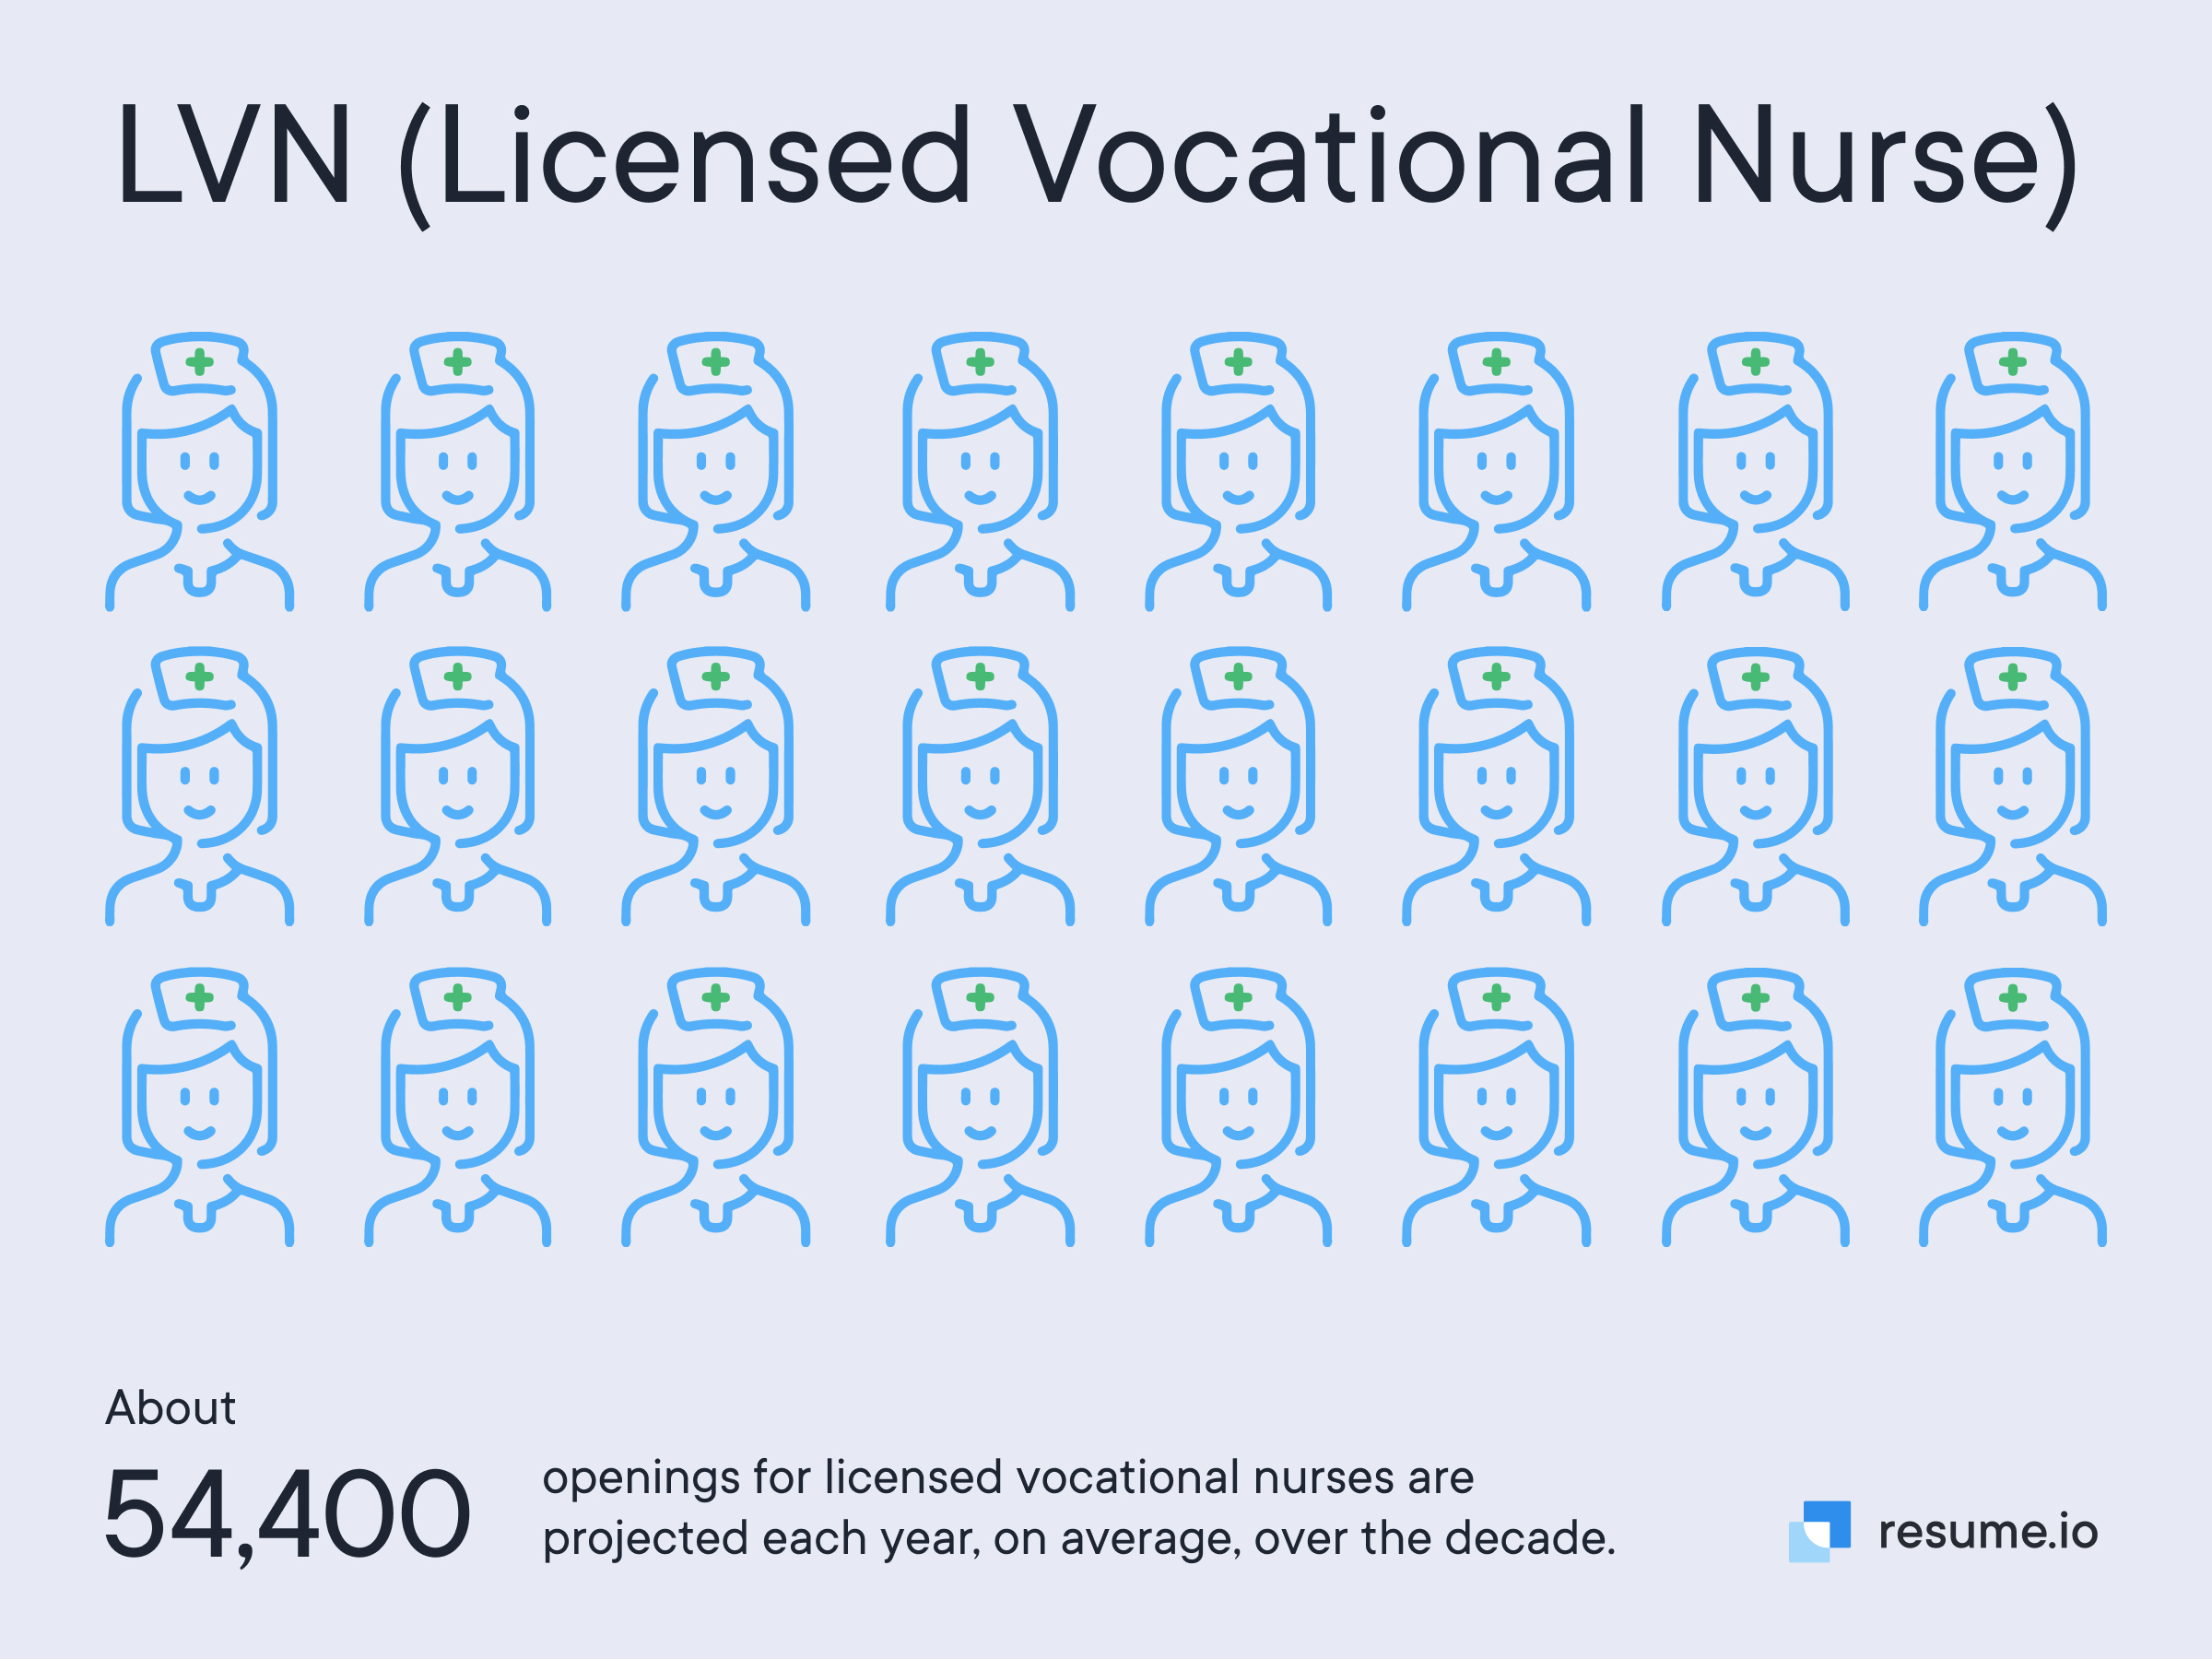 Number of openings for licensed vocational nurses